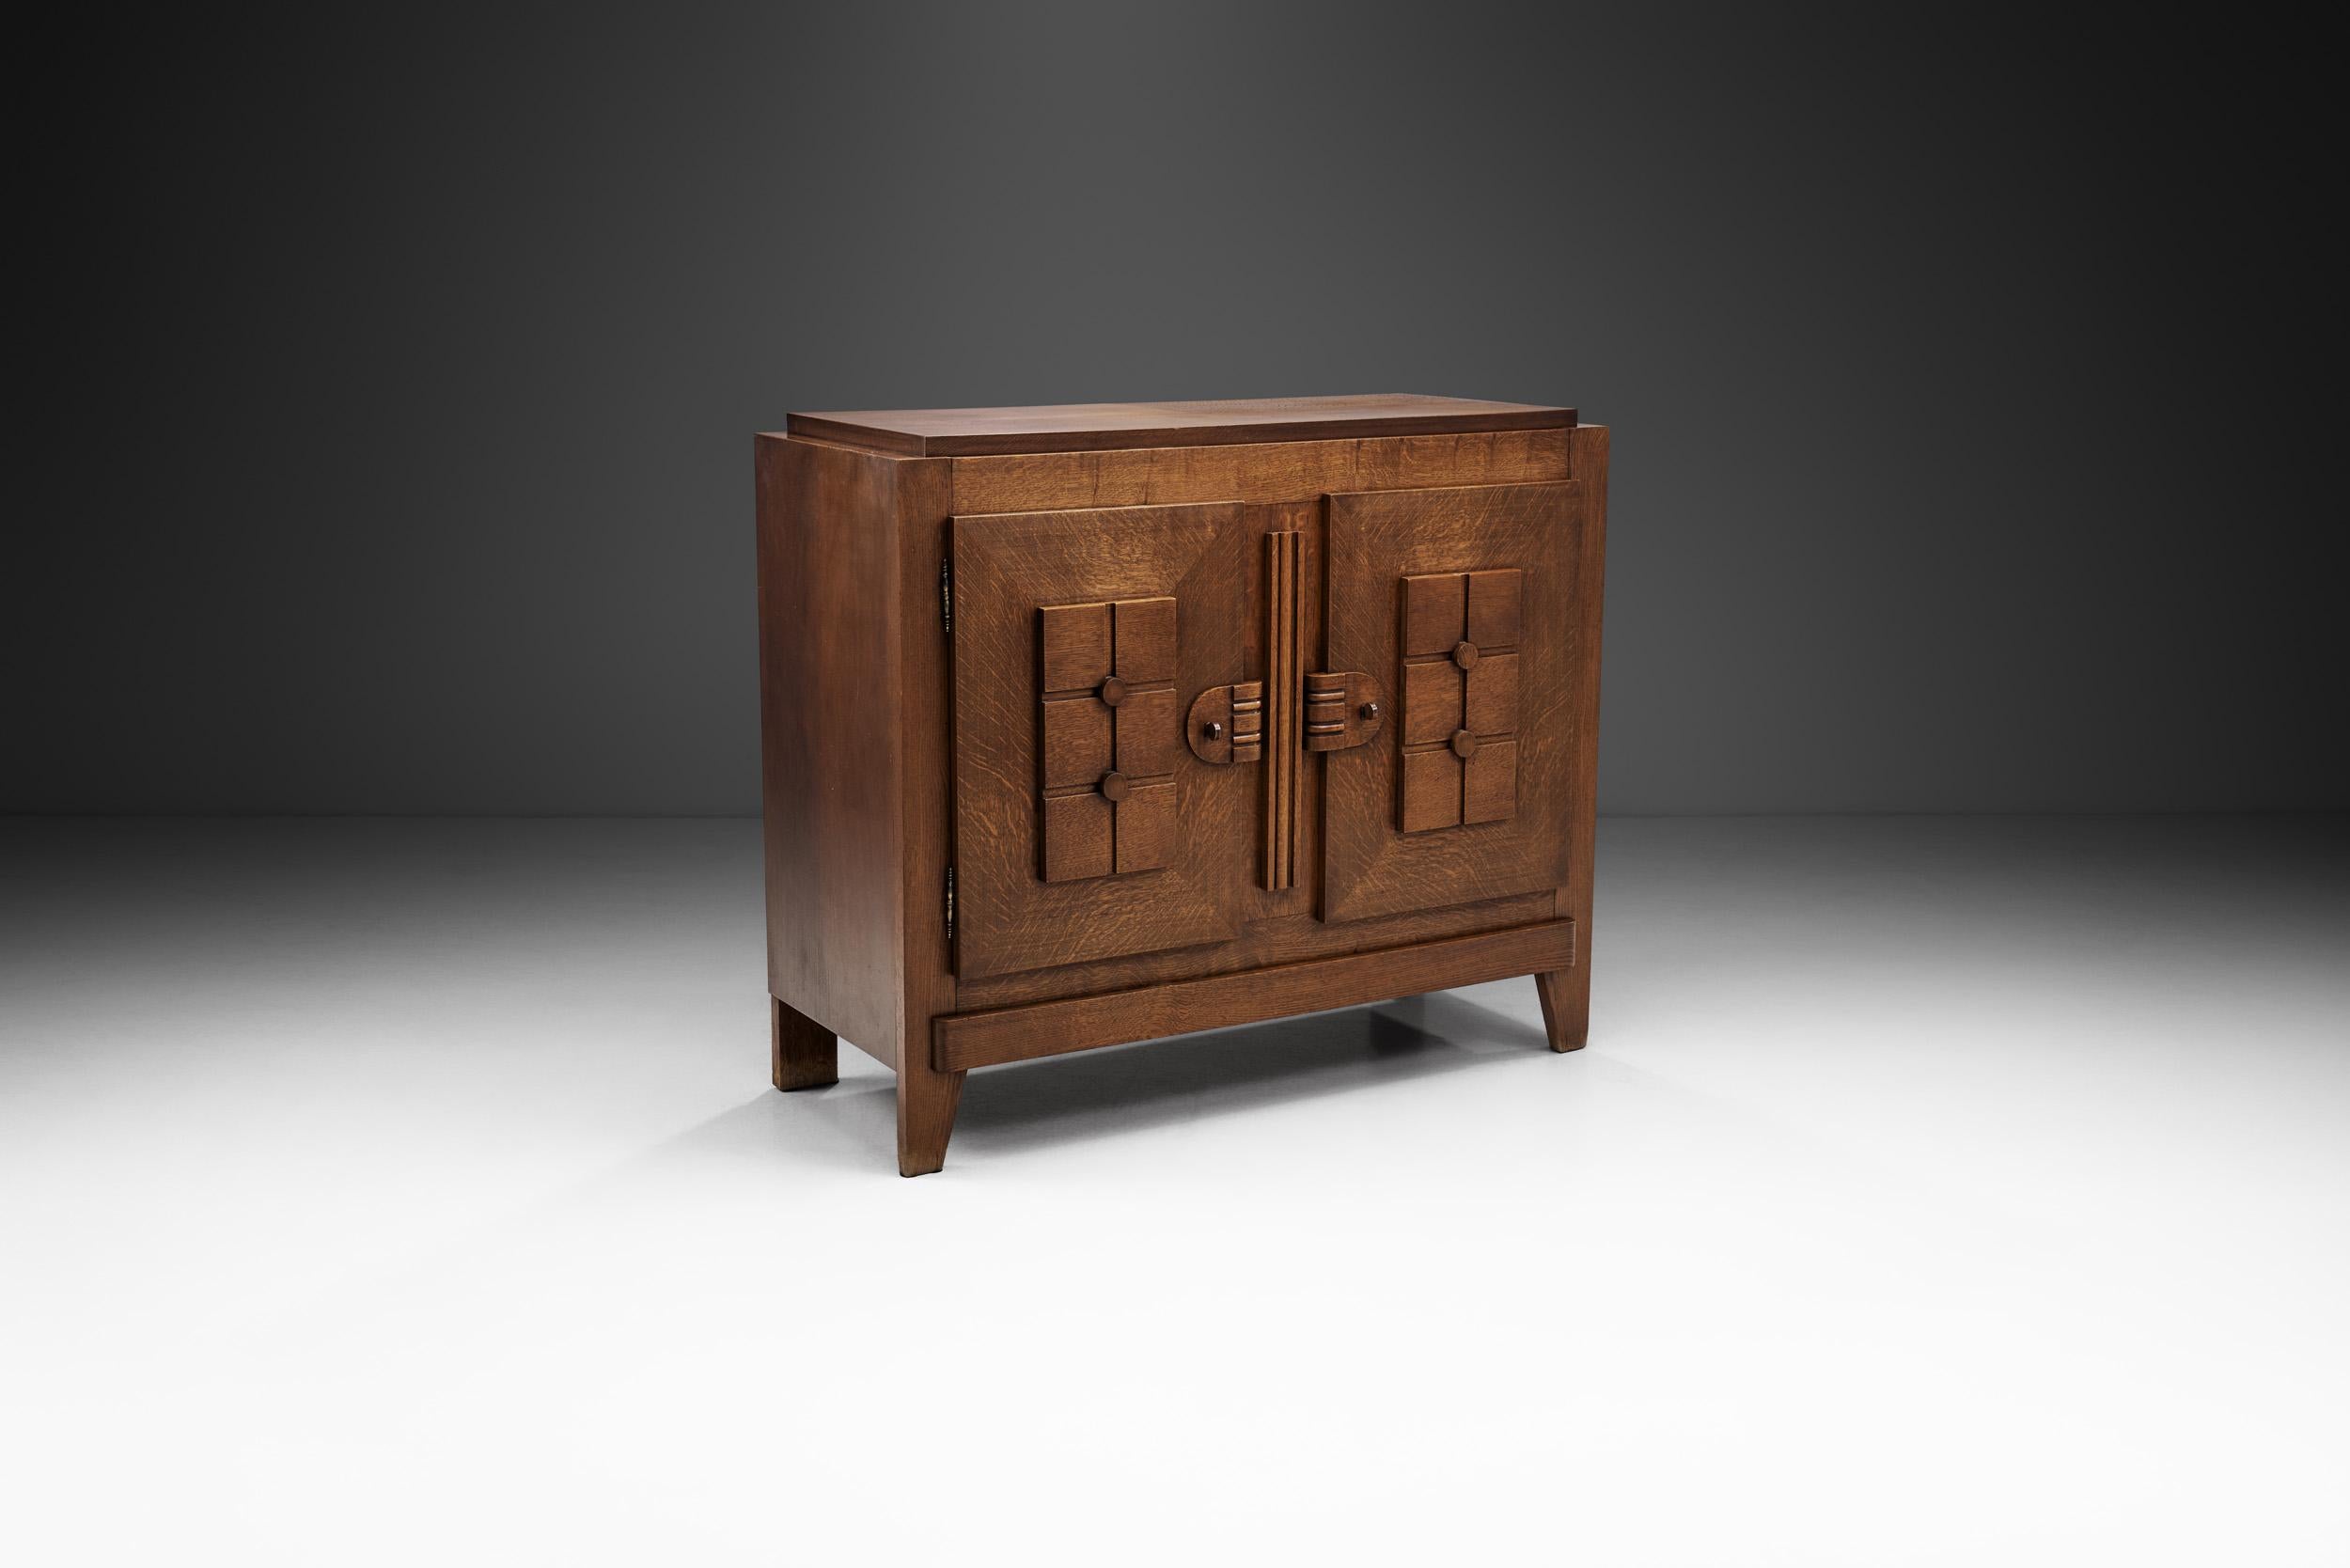 Featuring French designer, Charles Dudouyt’s signature style, this sideboard melds seamlessly with any style thanks to its elegant sense of lavishness. The oak form is elemental, enhanced by the sculptural carvings.

With its graphic carvings on